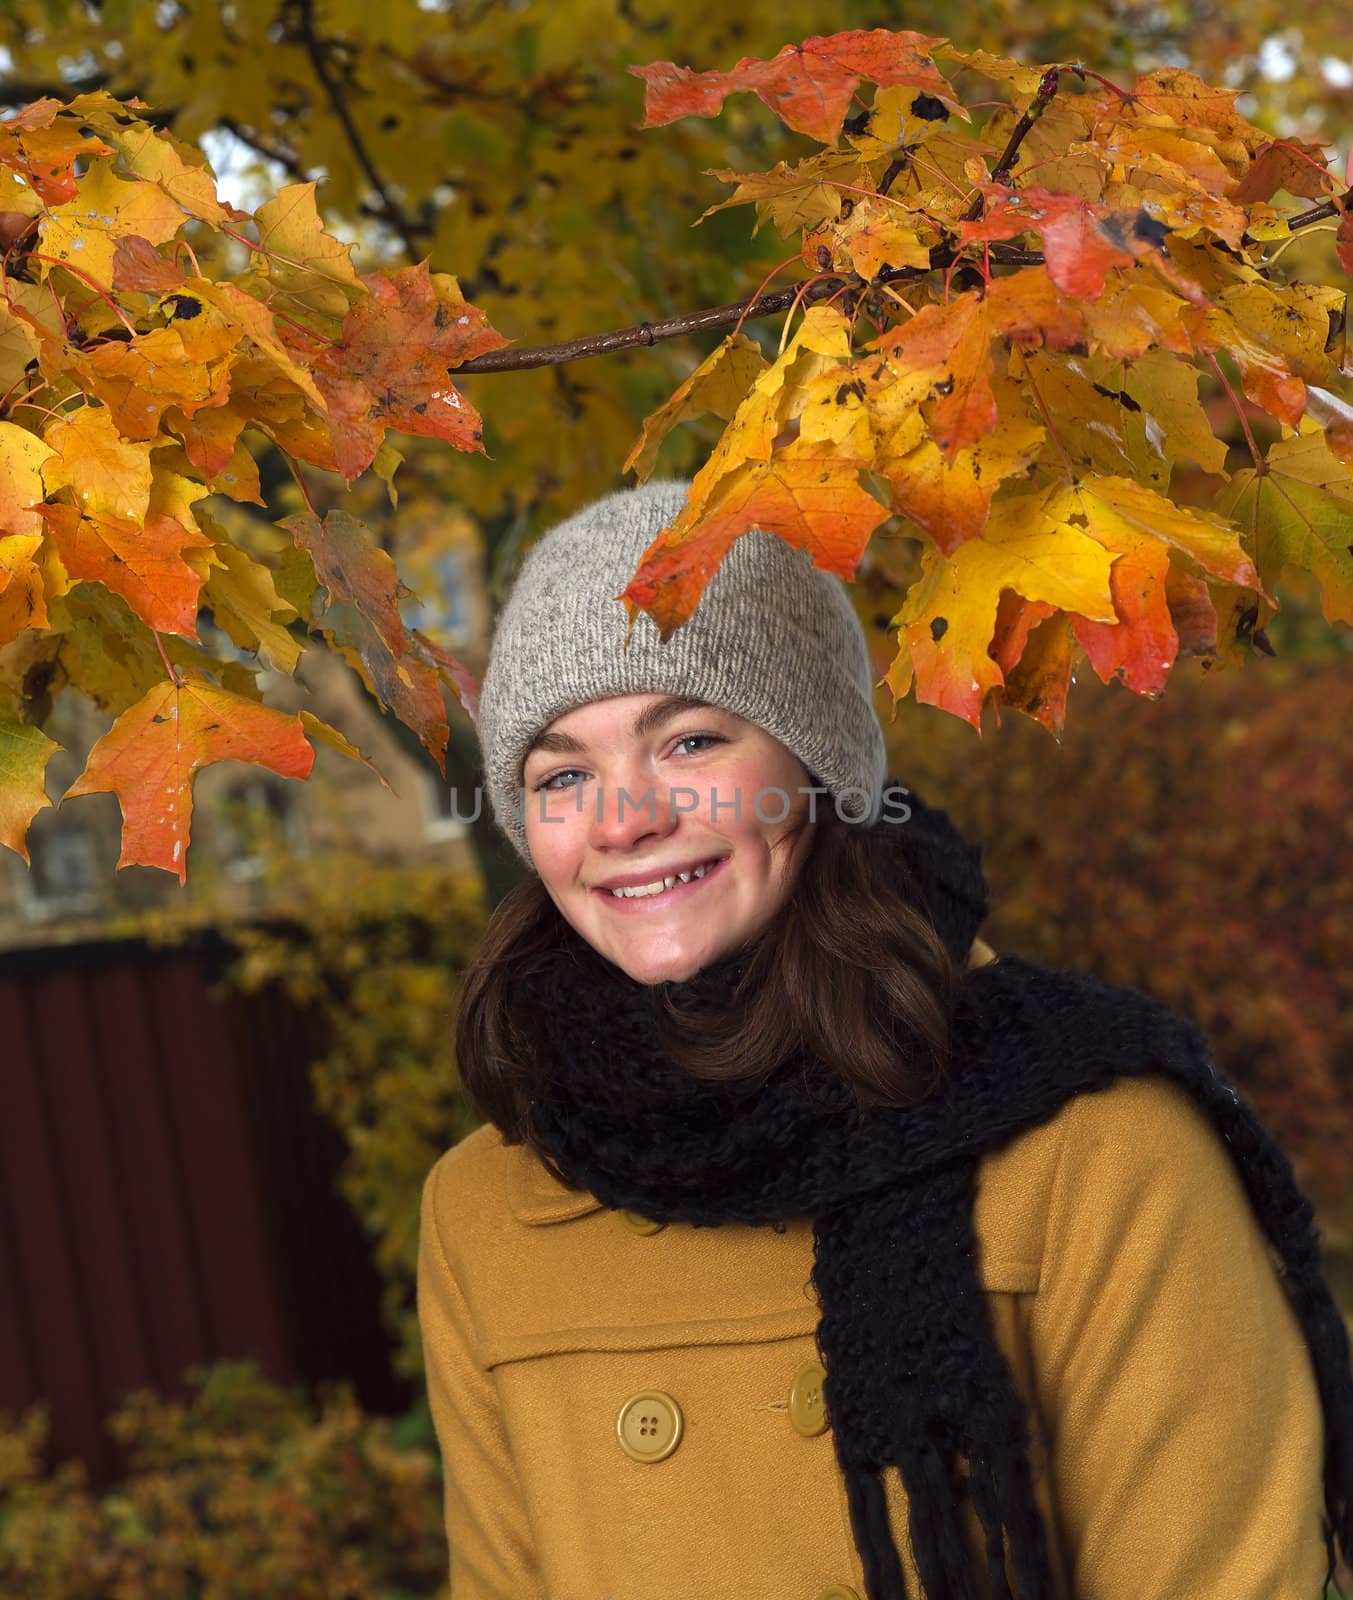 Young girl portrait in Autumn Environment